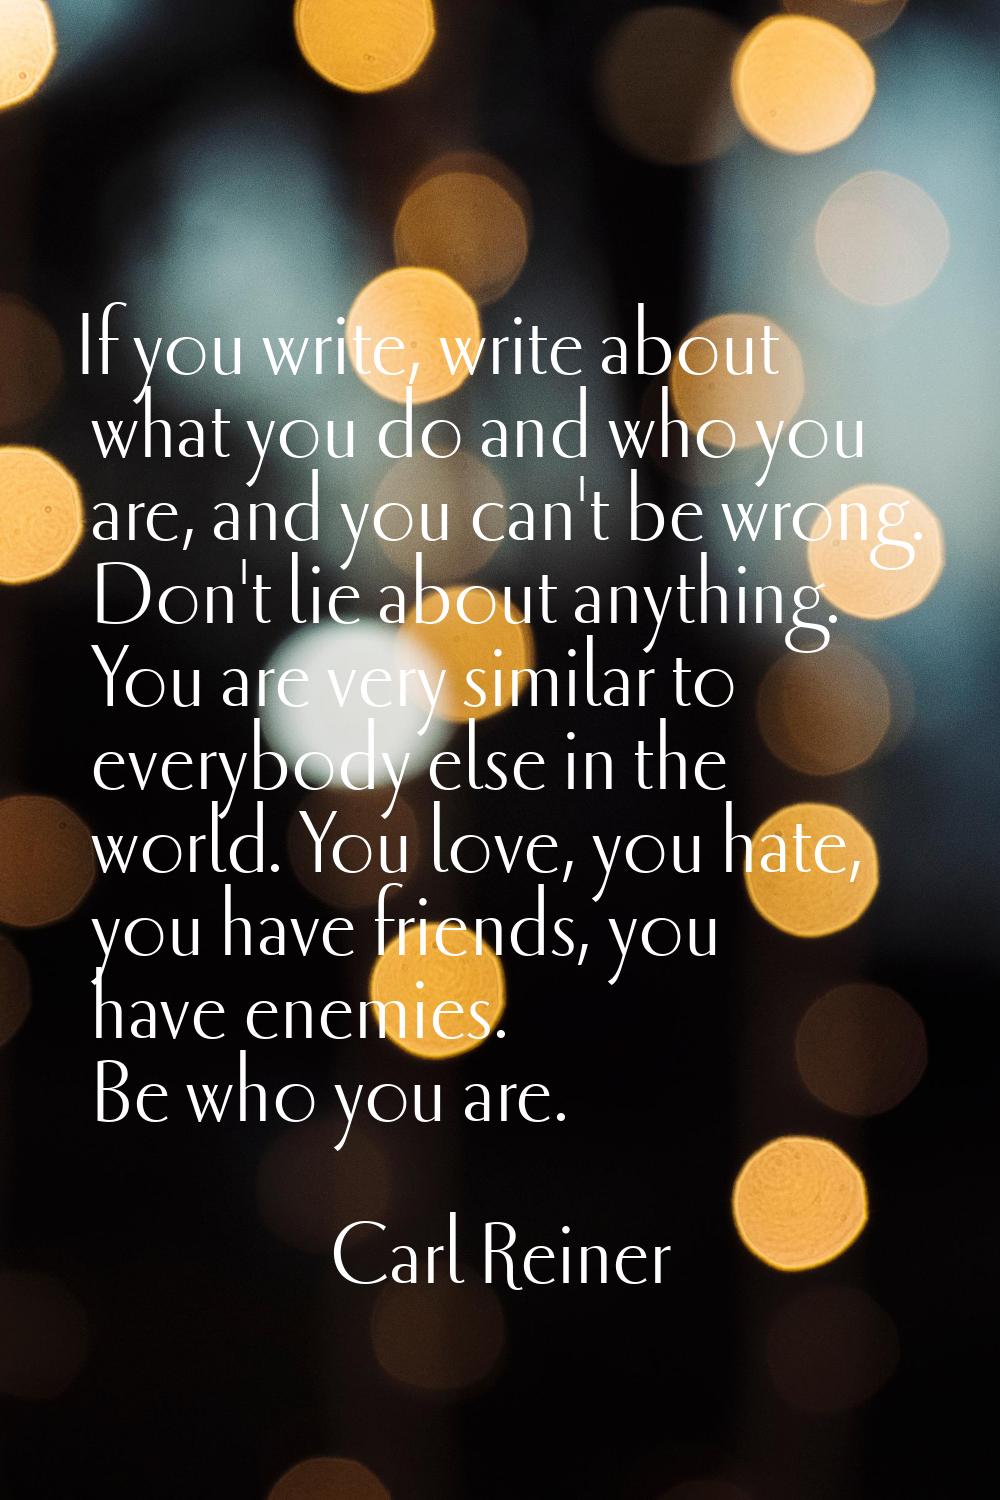 If you write, write about what you do and who you are, and you can't be wrong. Don't lie about anyt